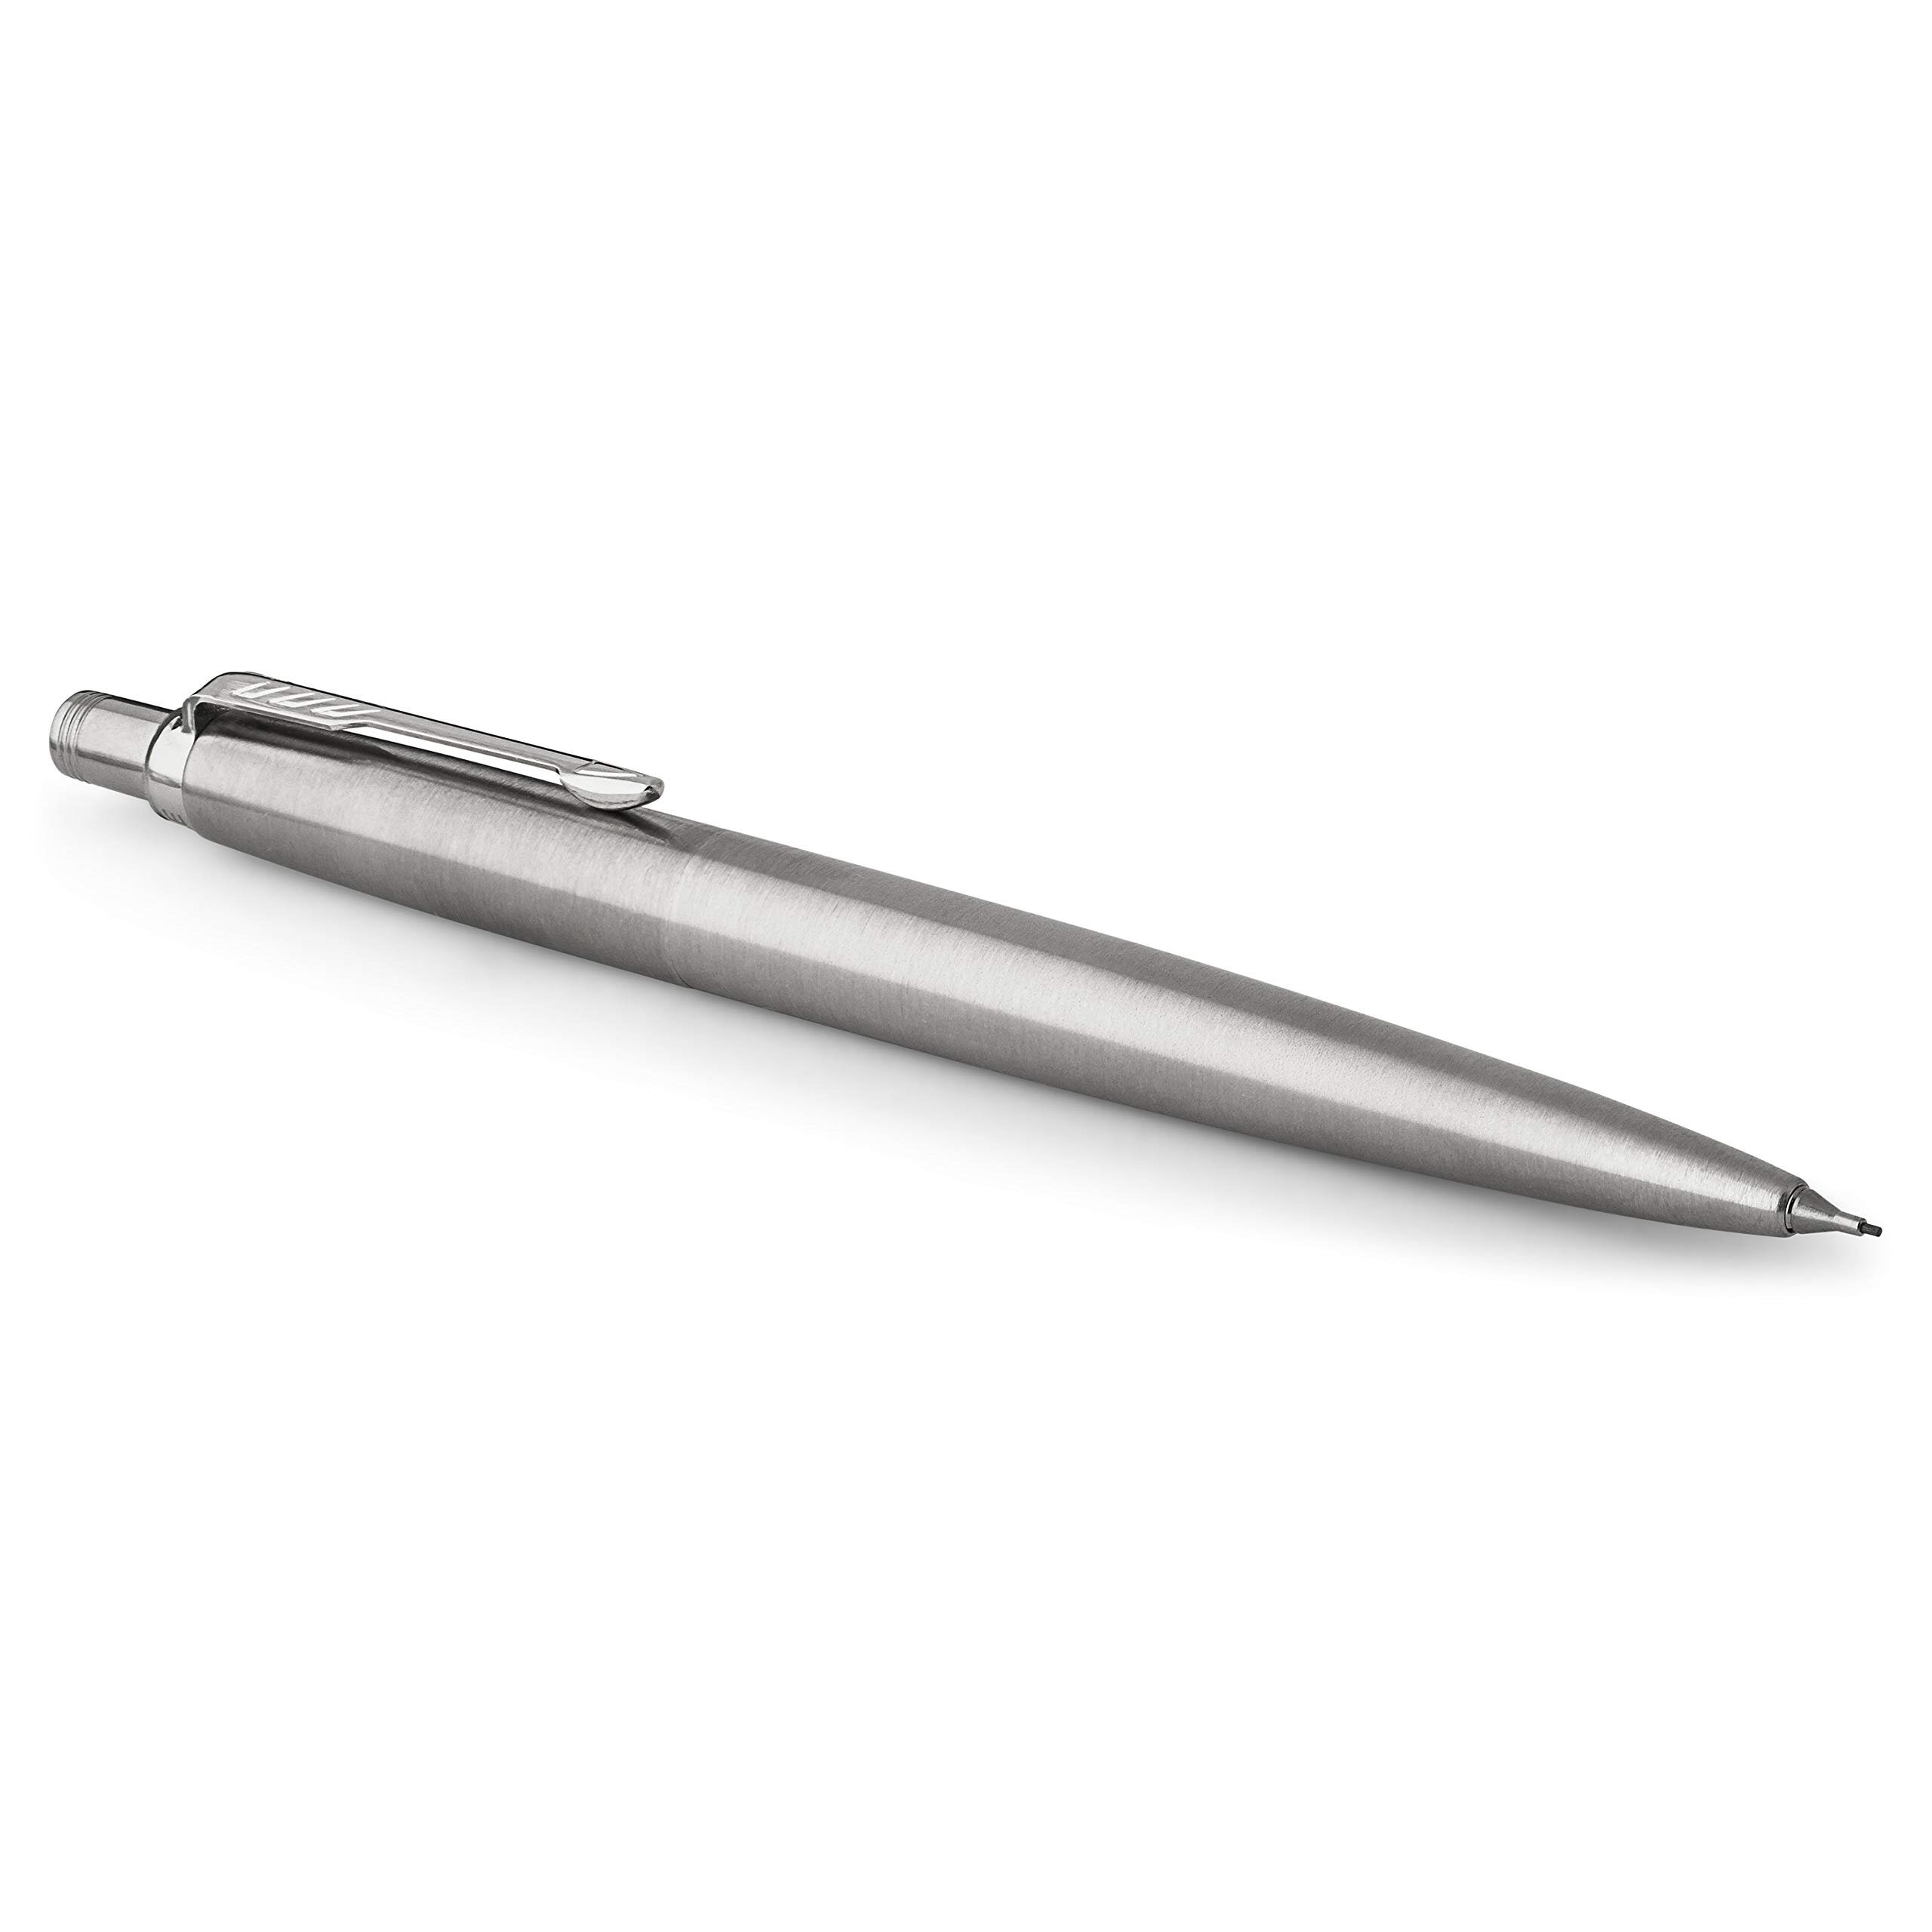 Amazon.com : Parker Mechanical Pencil, Jotter, Stainless Steel with Chrome Trim, Medium Point (0.5mm) : Office Products 不锈自动铅笔